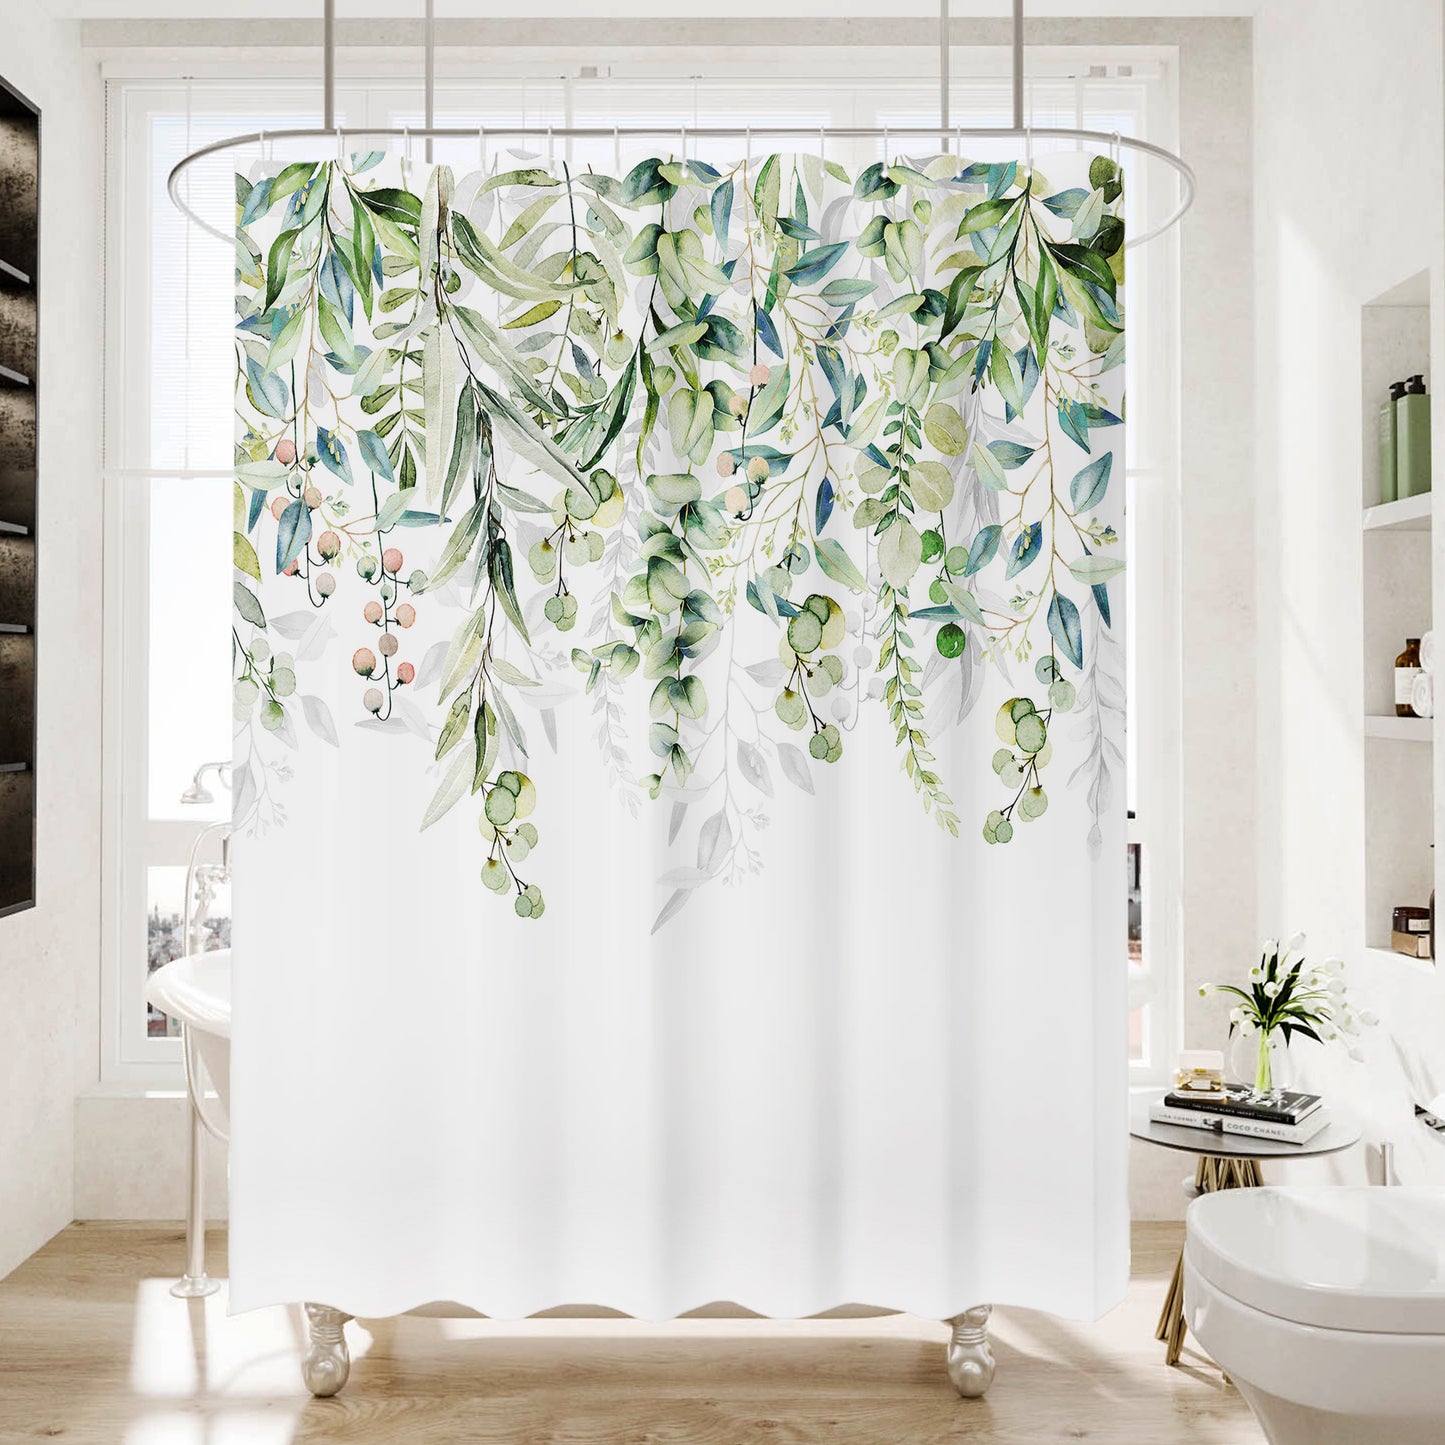 Thicken Durable Polyester Blend Cloth Fabric Bathroom Curtain Colorful Bohemian Boho Floral Print Beautiful Bright Shower Curtain for Bathroom Decoration, 72"x72"